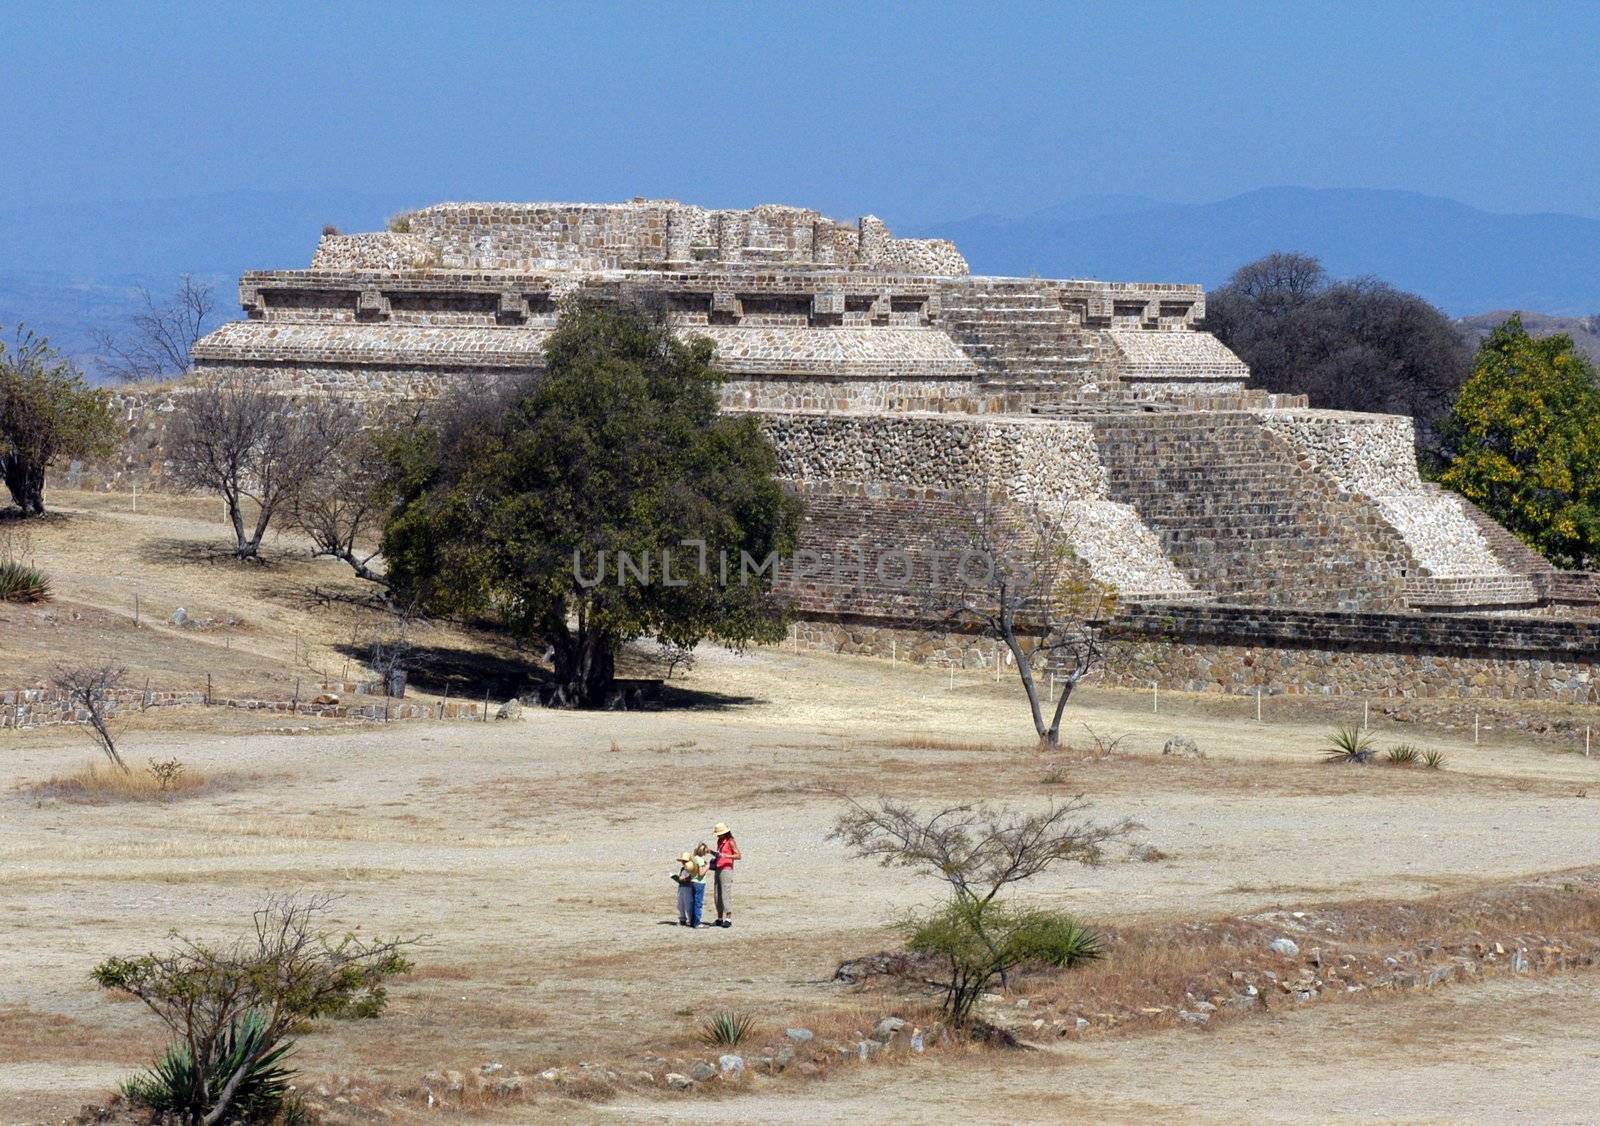 Ruins, Monte Alban, Mexico by haak78